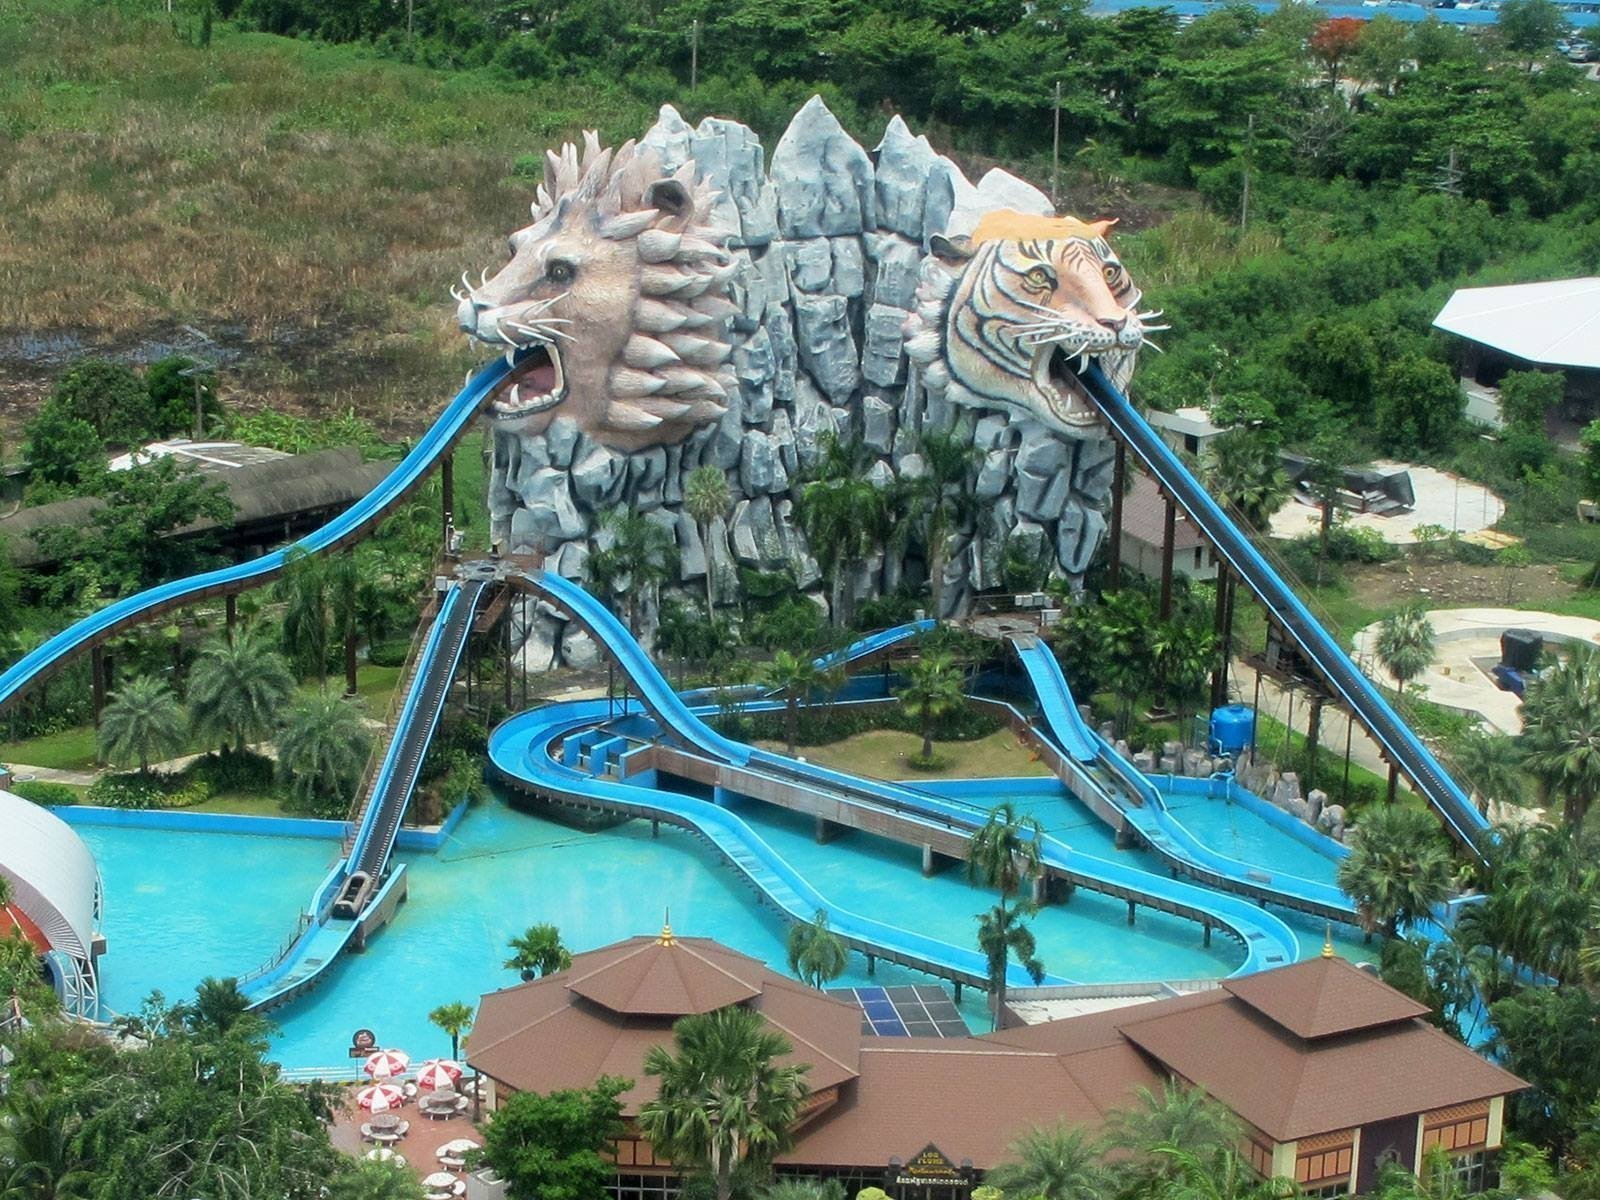 Tenerife trips to the tourist attractions - Siam Park